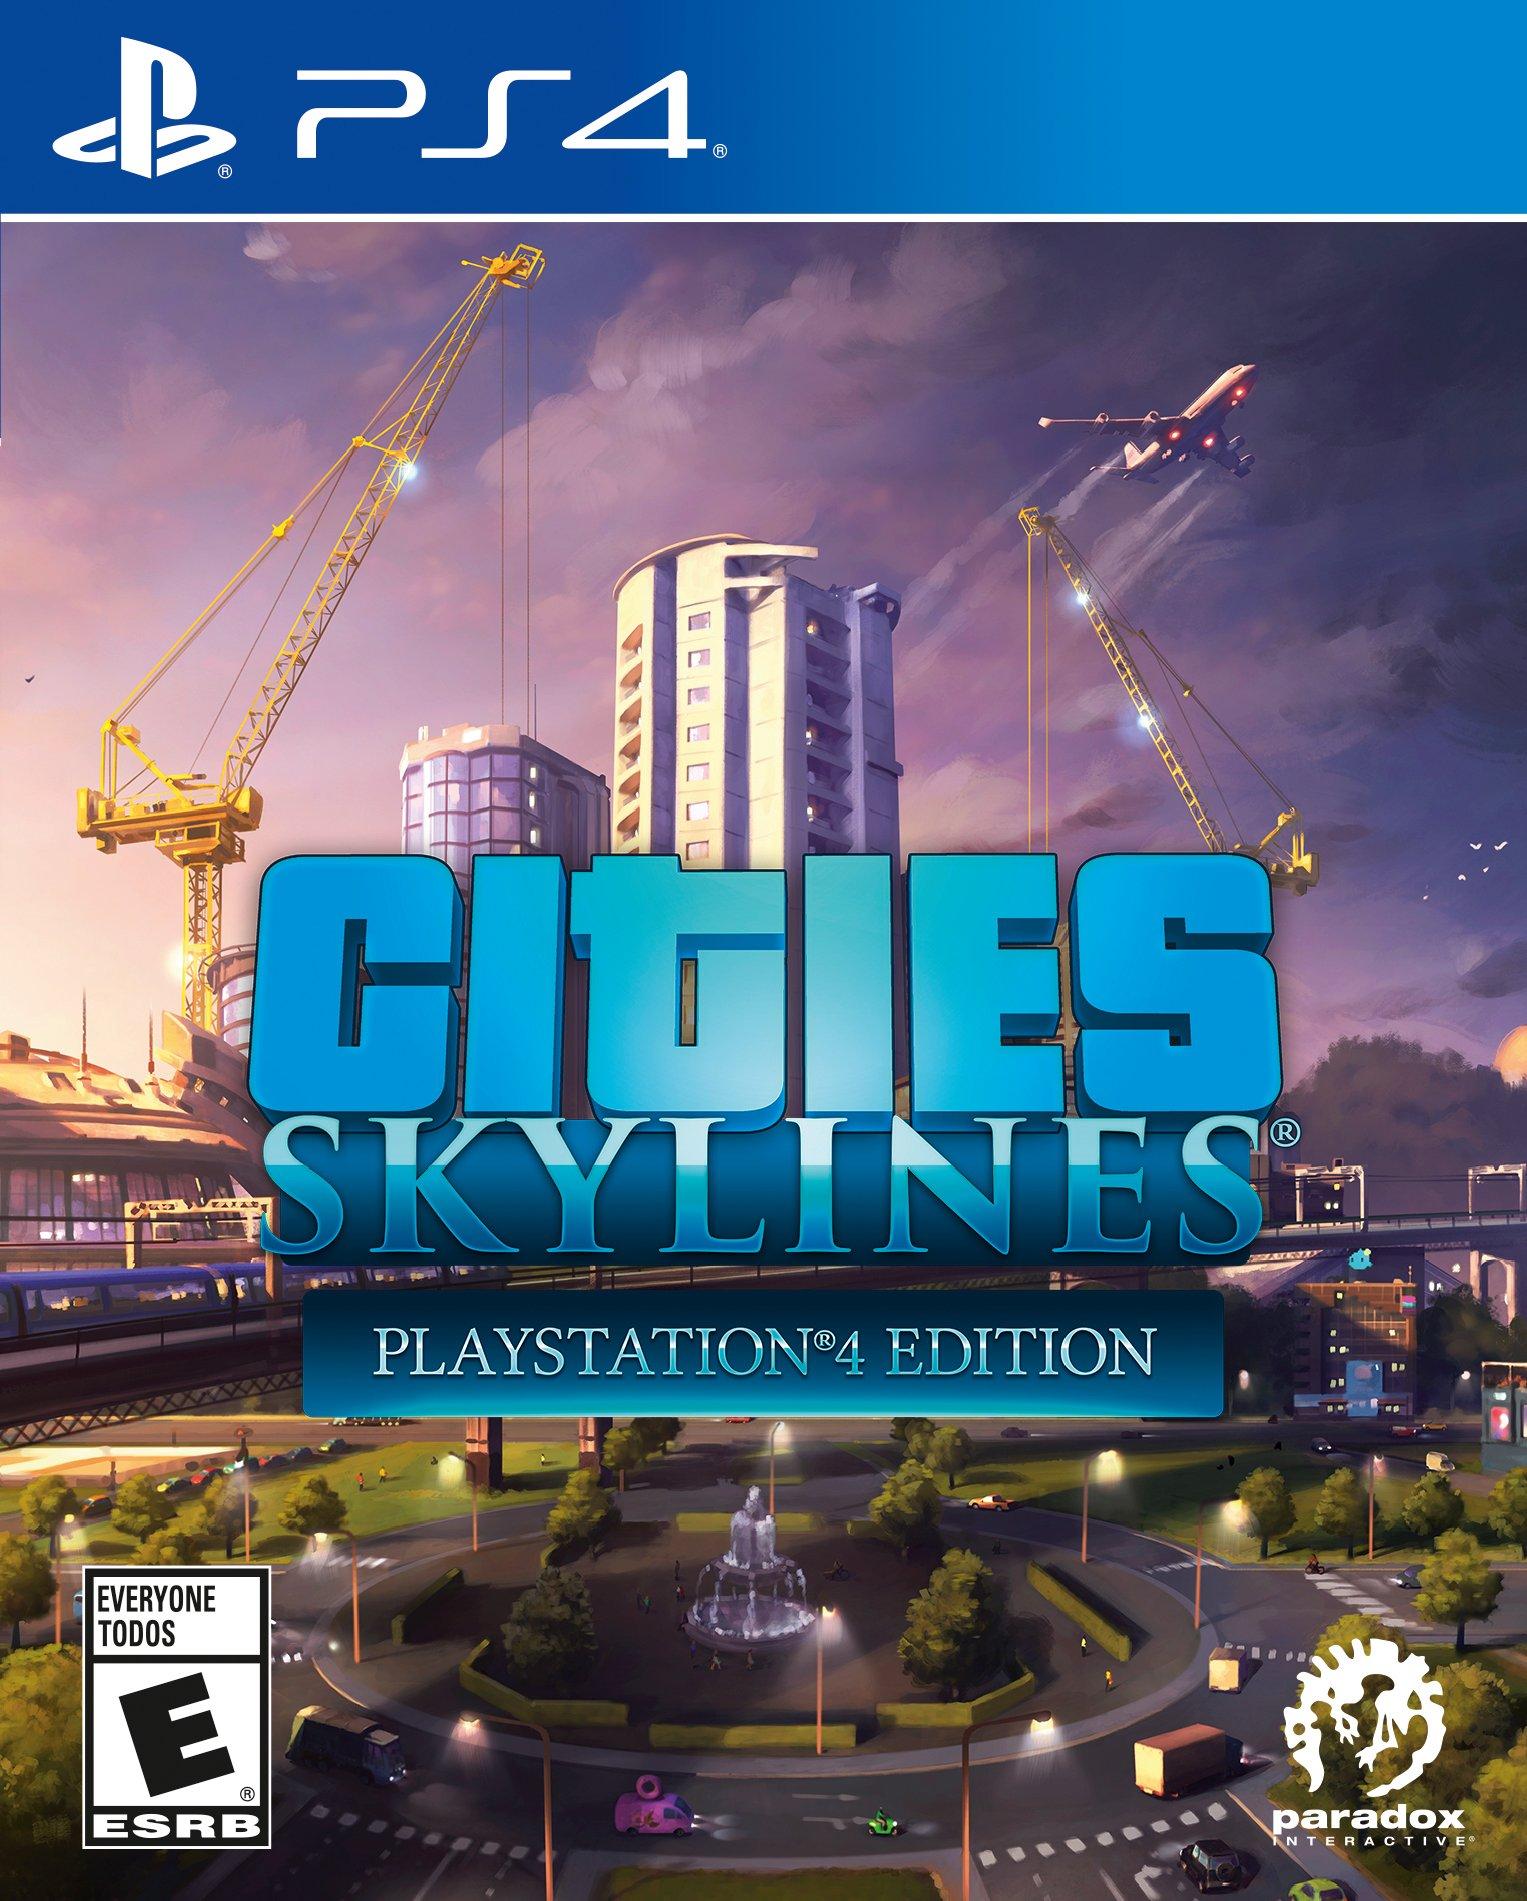 simcity for playstation 4